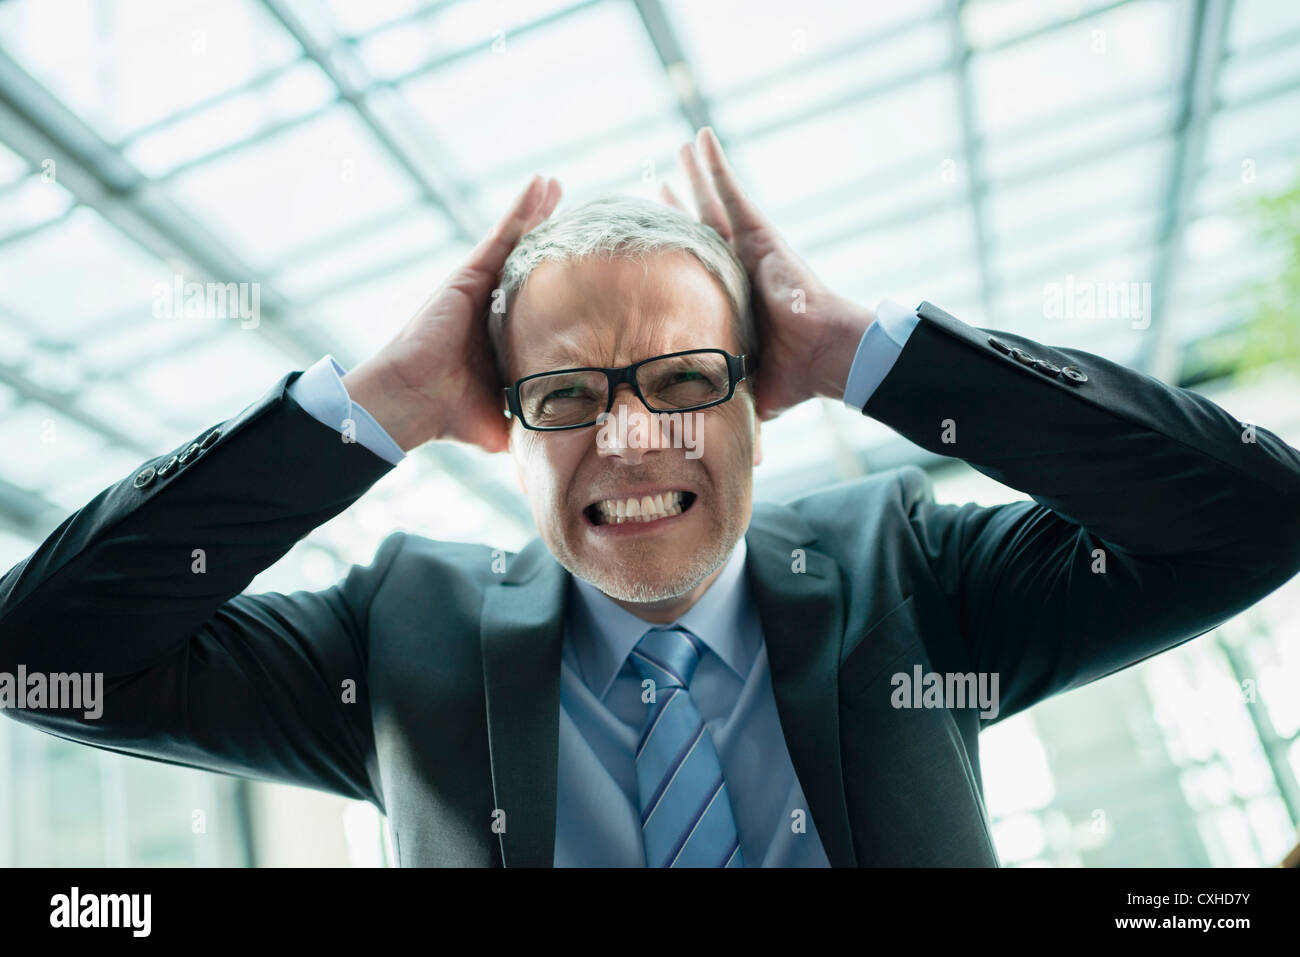 Germany, Stuttgart, Angry businessman, close up Stock Photo